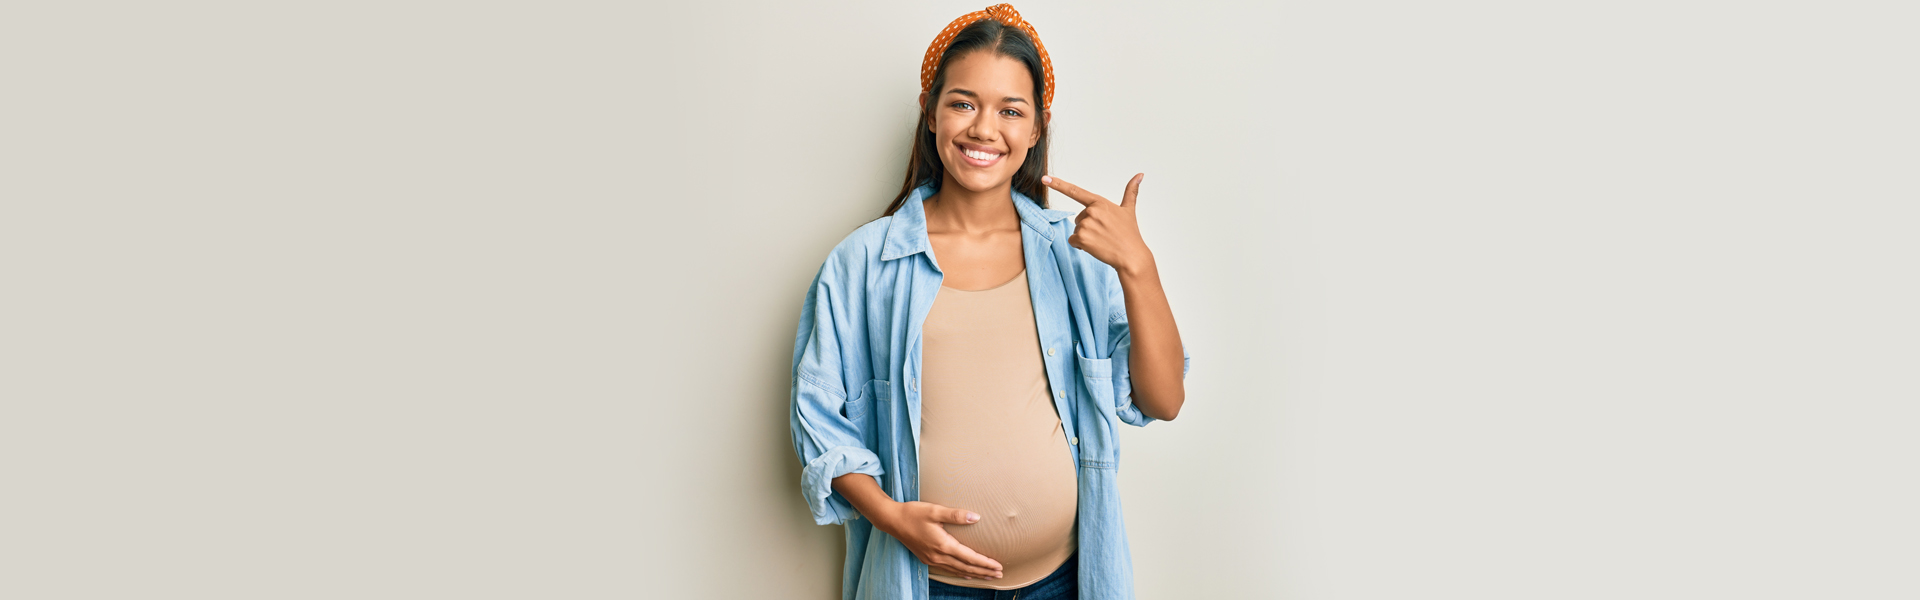 SHOULD I GO TO THE DENTIST WHILE PREGNANT? ARE THERE NEGATIVE ASSOCIATIONS WITH PREGNANCY & BAD DENTAL HEALTH?